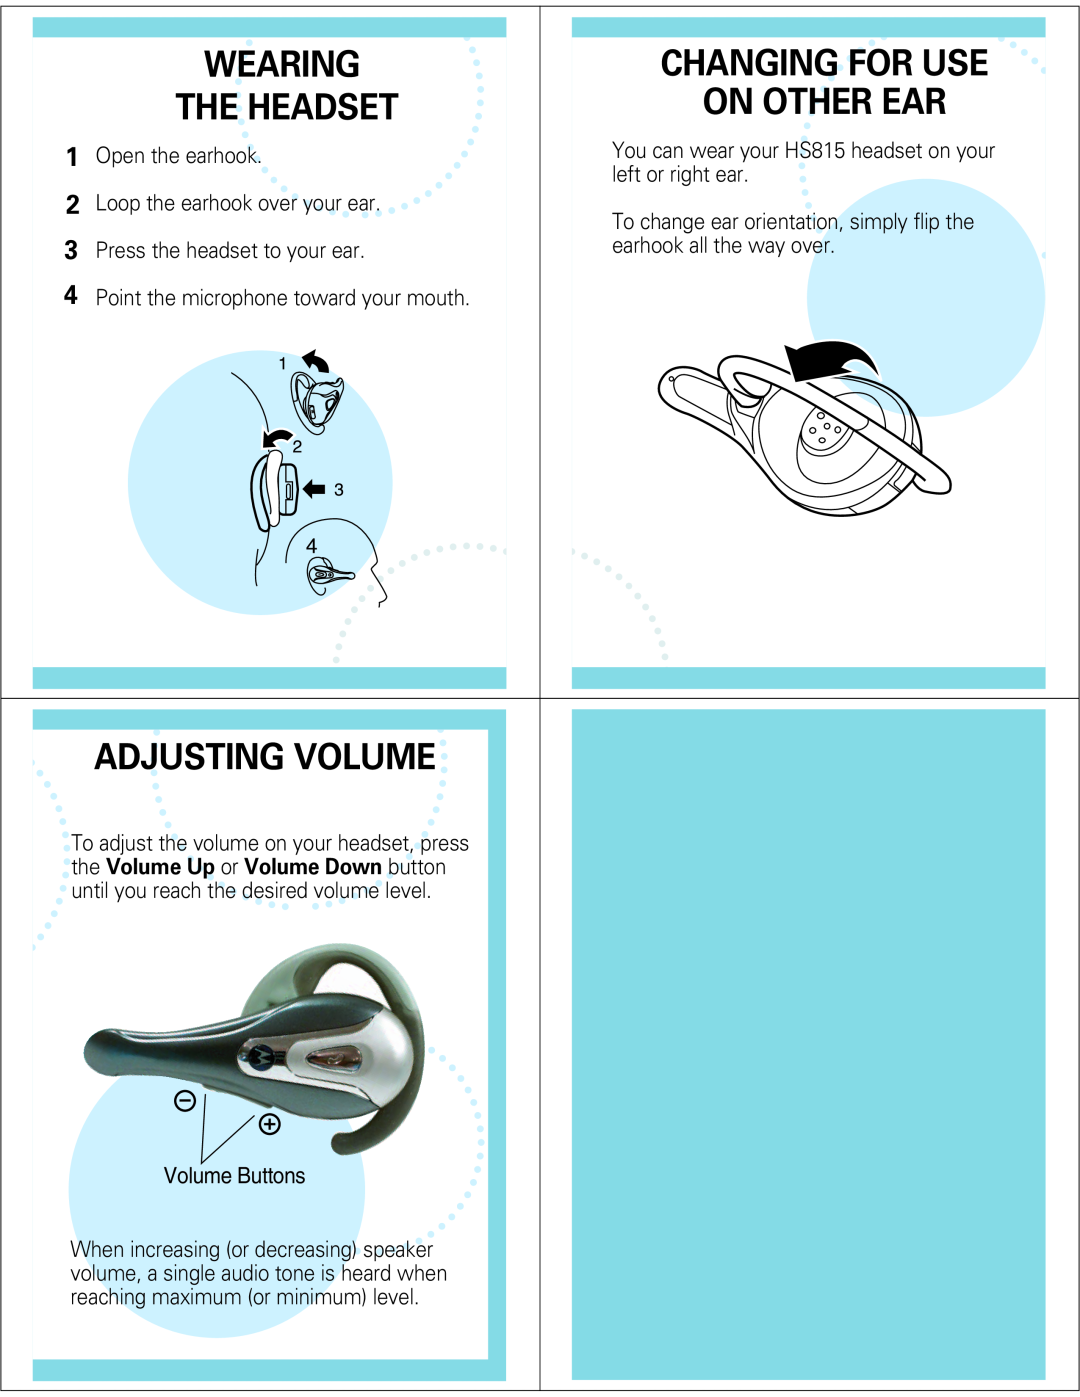 Motorola HS815 manual On Other Ear, Adjusting Volume, Changing For Use, Wearing, The Headset 